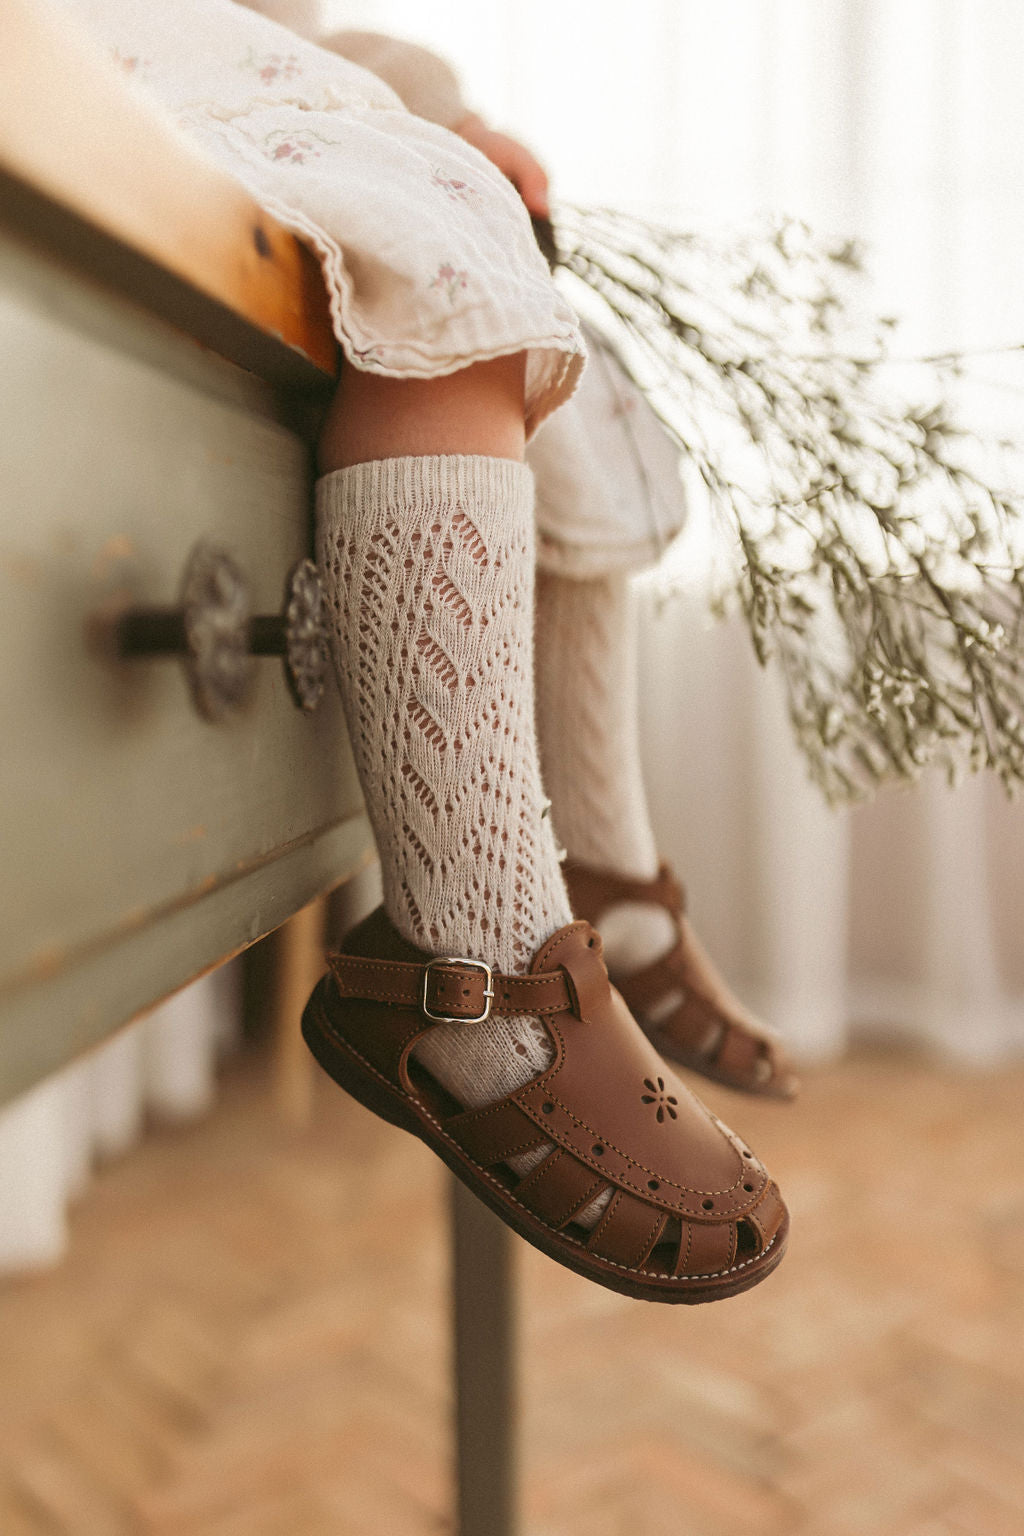 Kids handmade leather boots, sandals & shoes. Adelisa & Co.